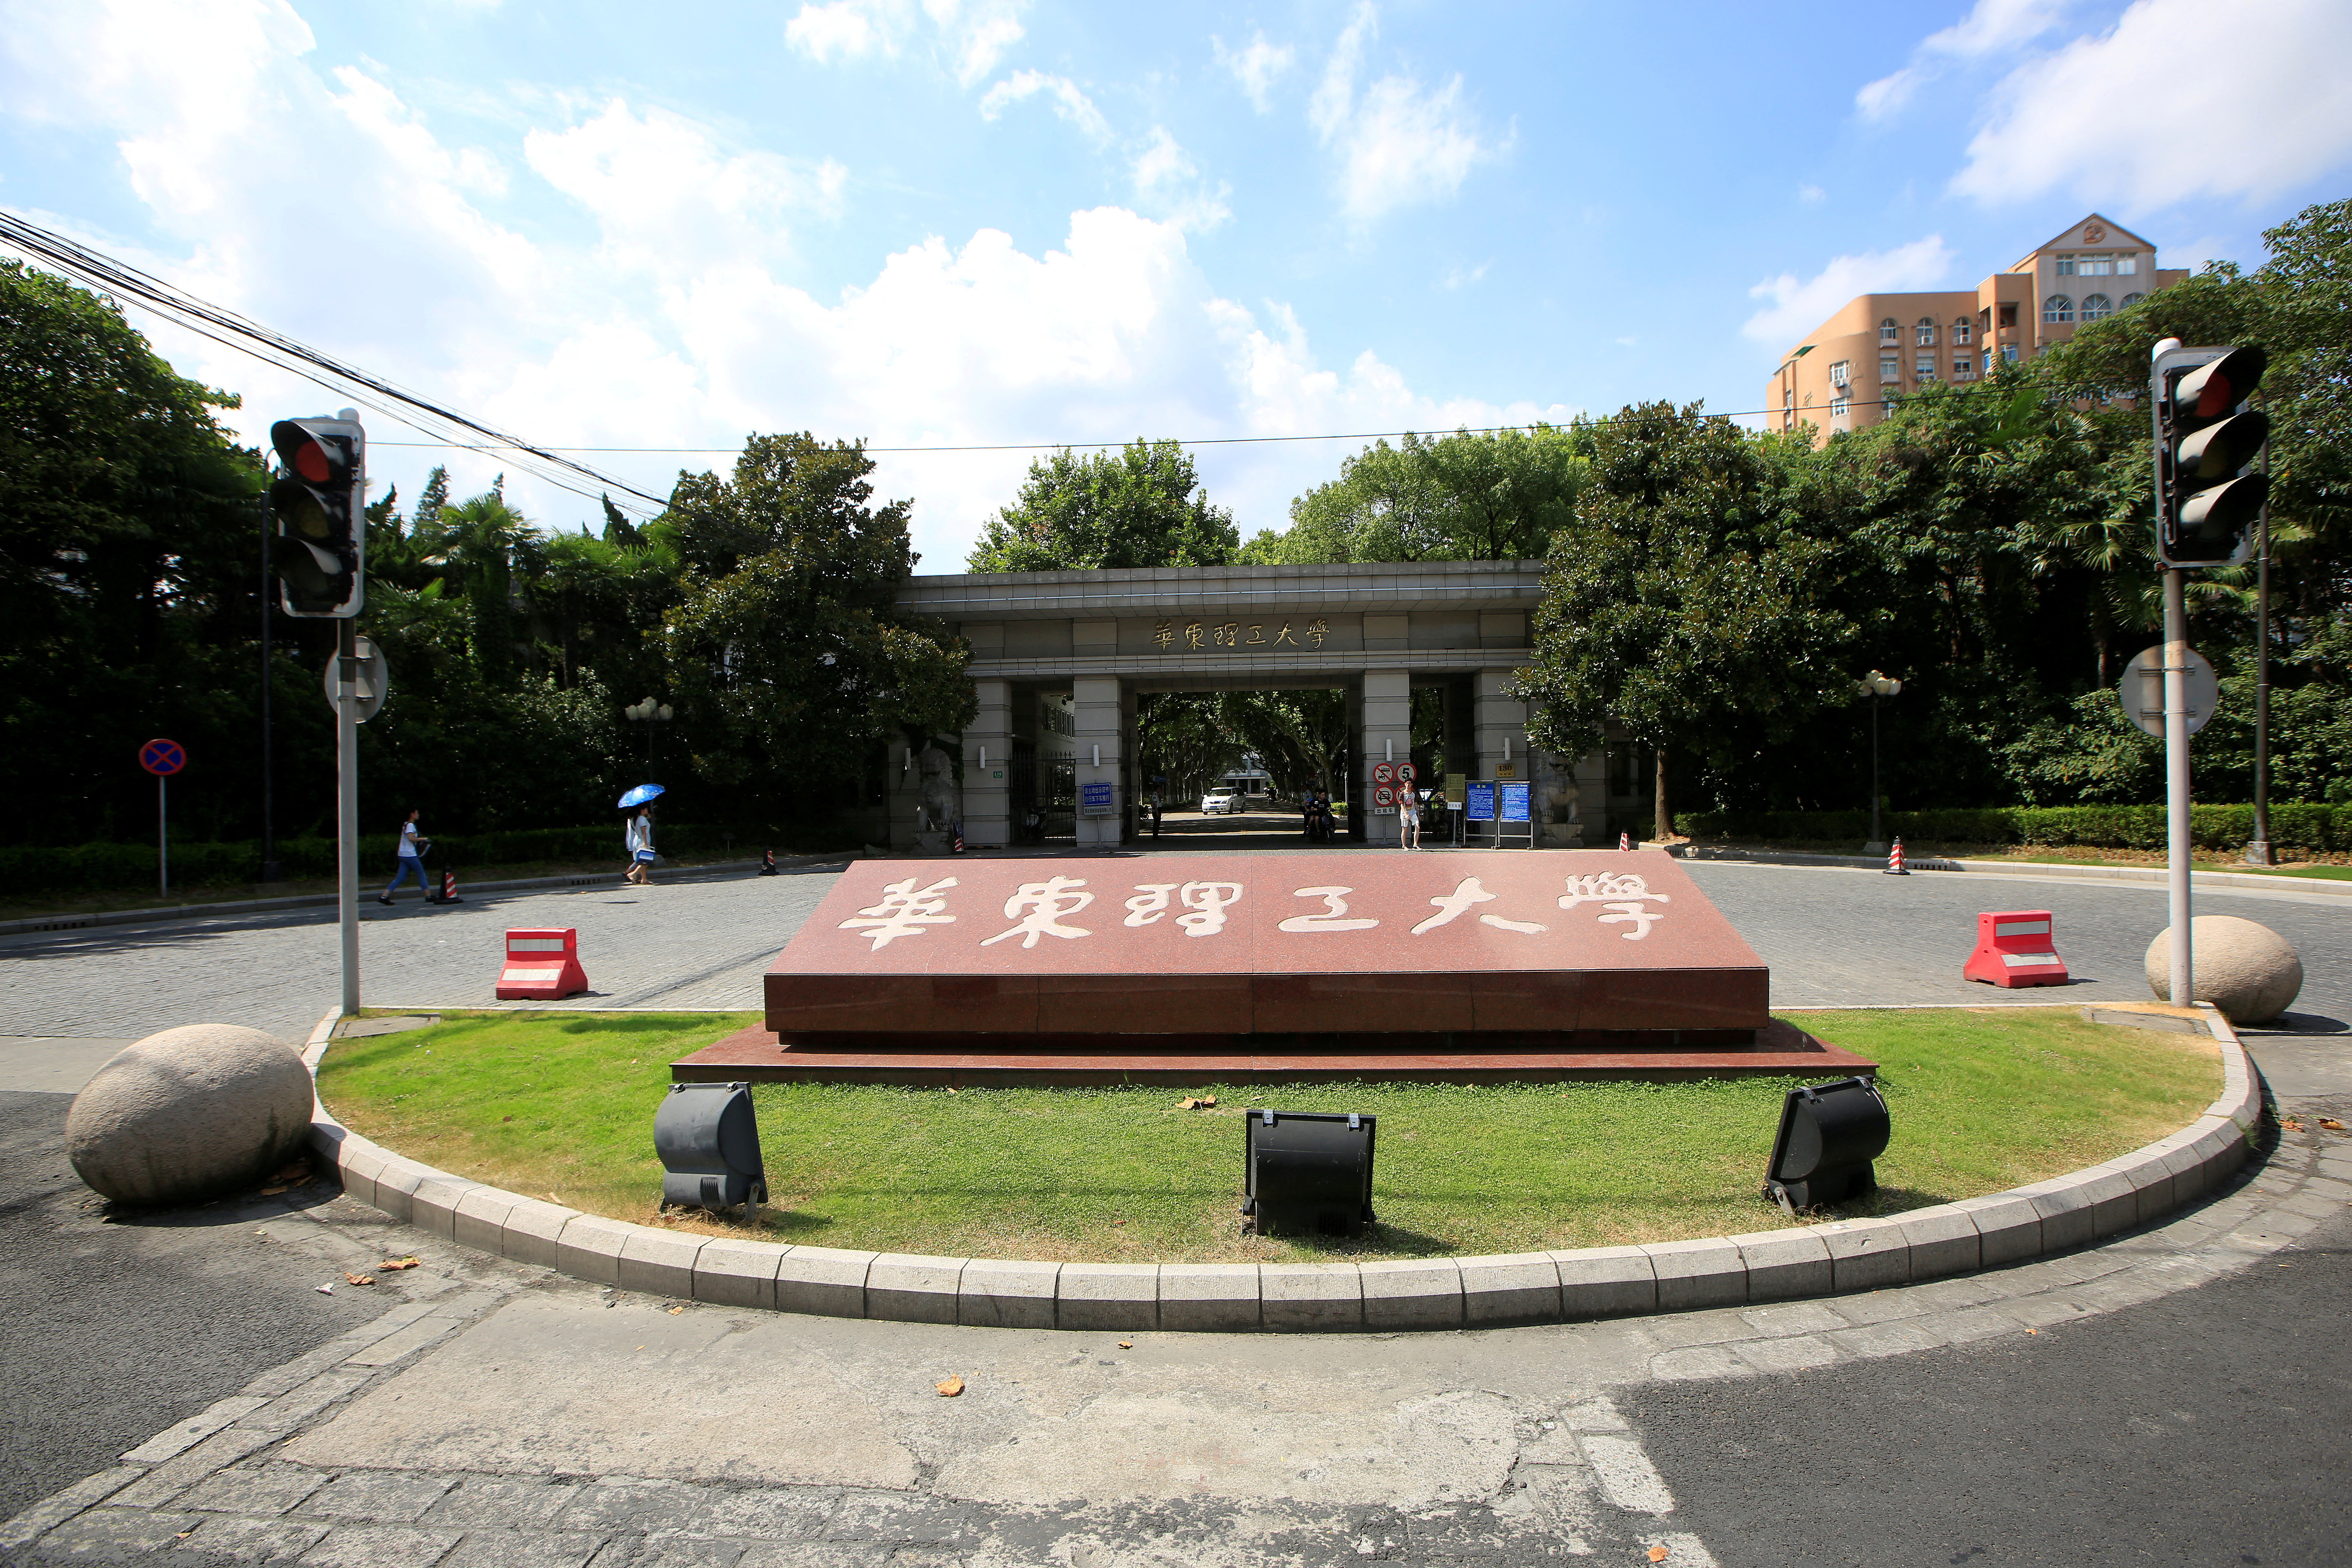 The gate of East China University of Science and Technology is seen in shanghai